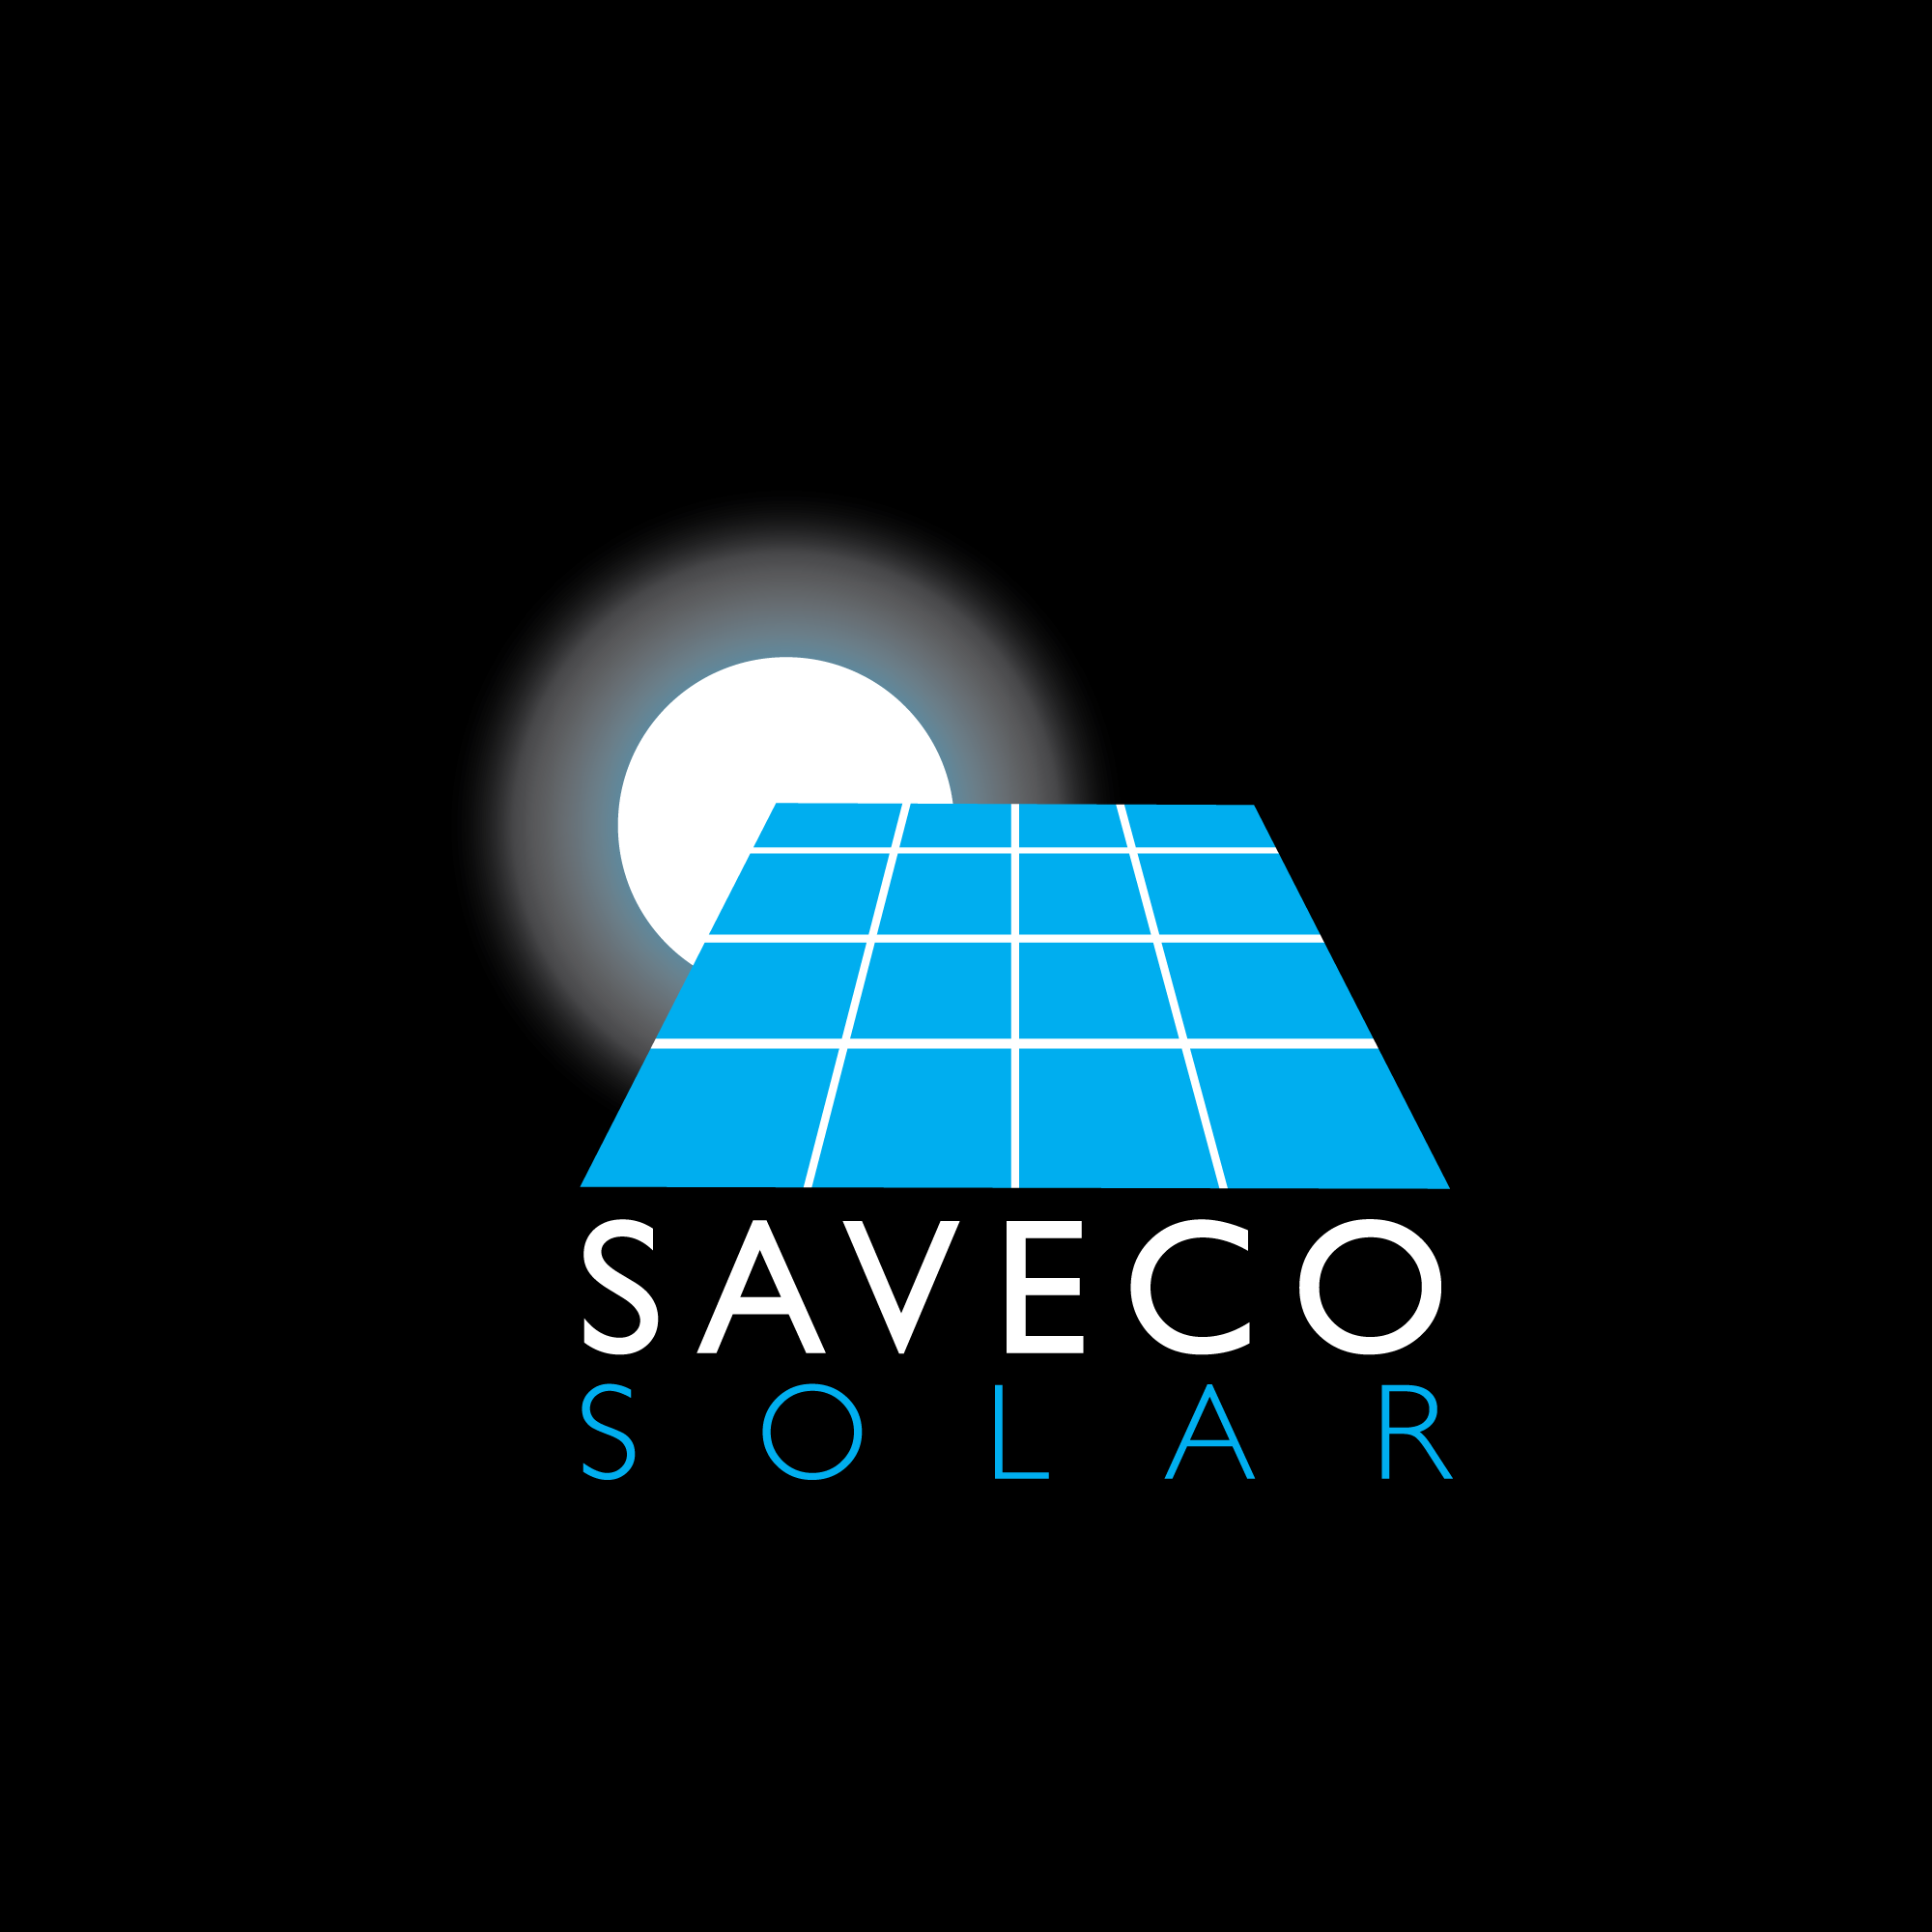 Saveco Solar Offers Full Solar Panel Services for Little to No Upfront Cost